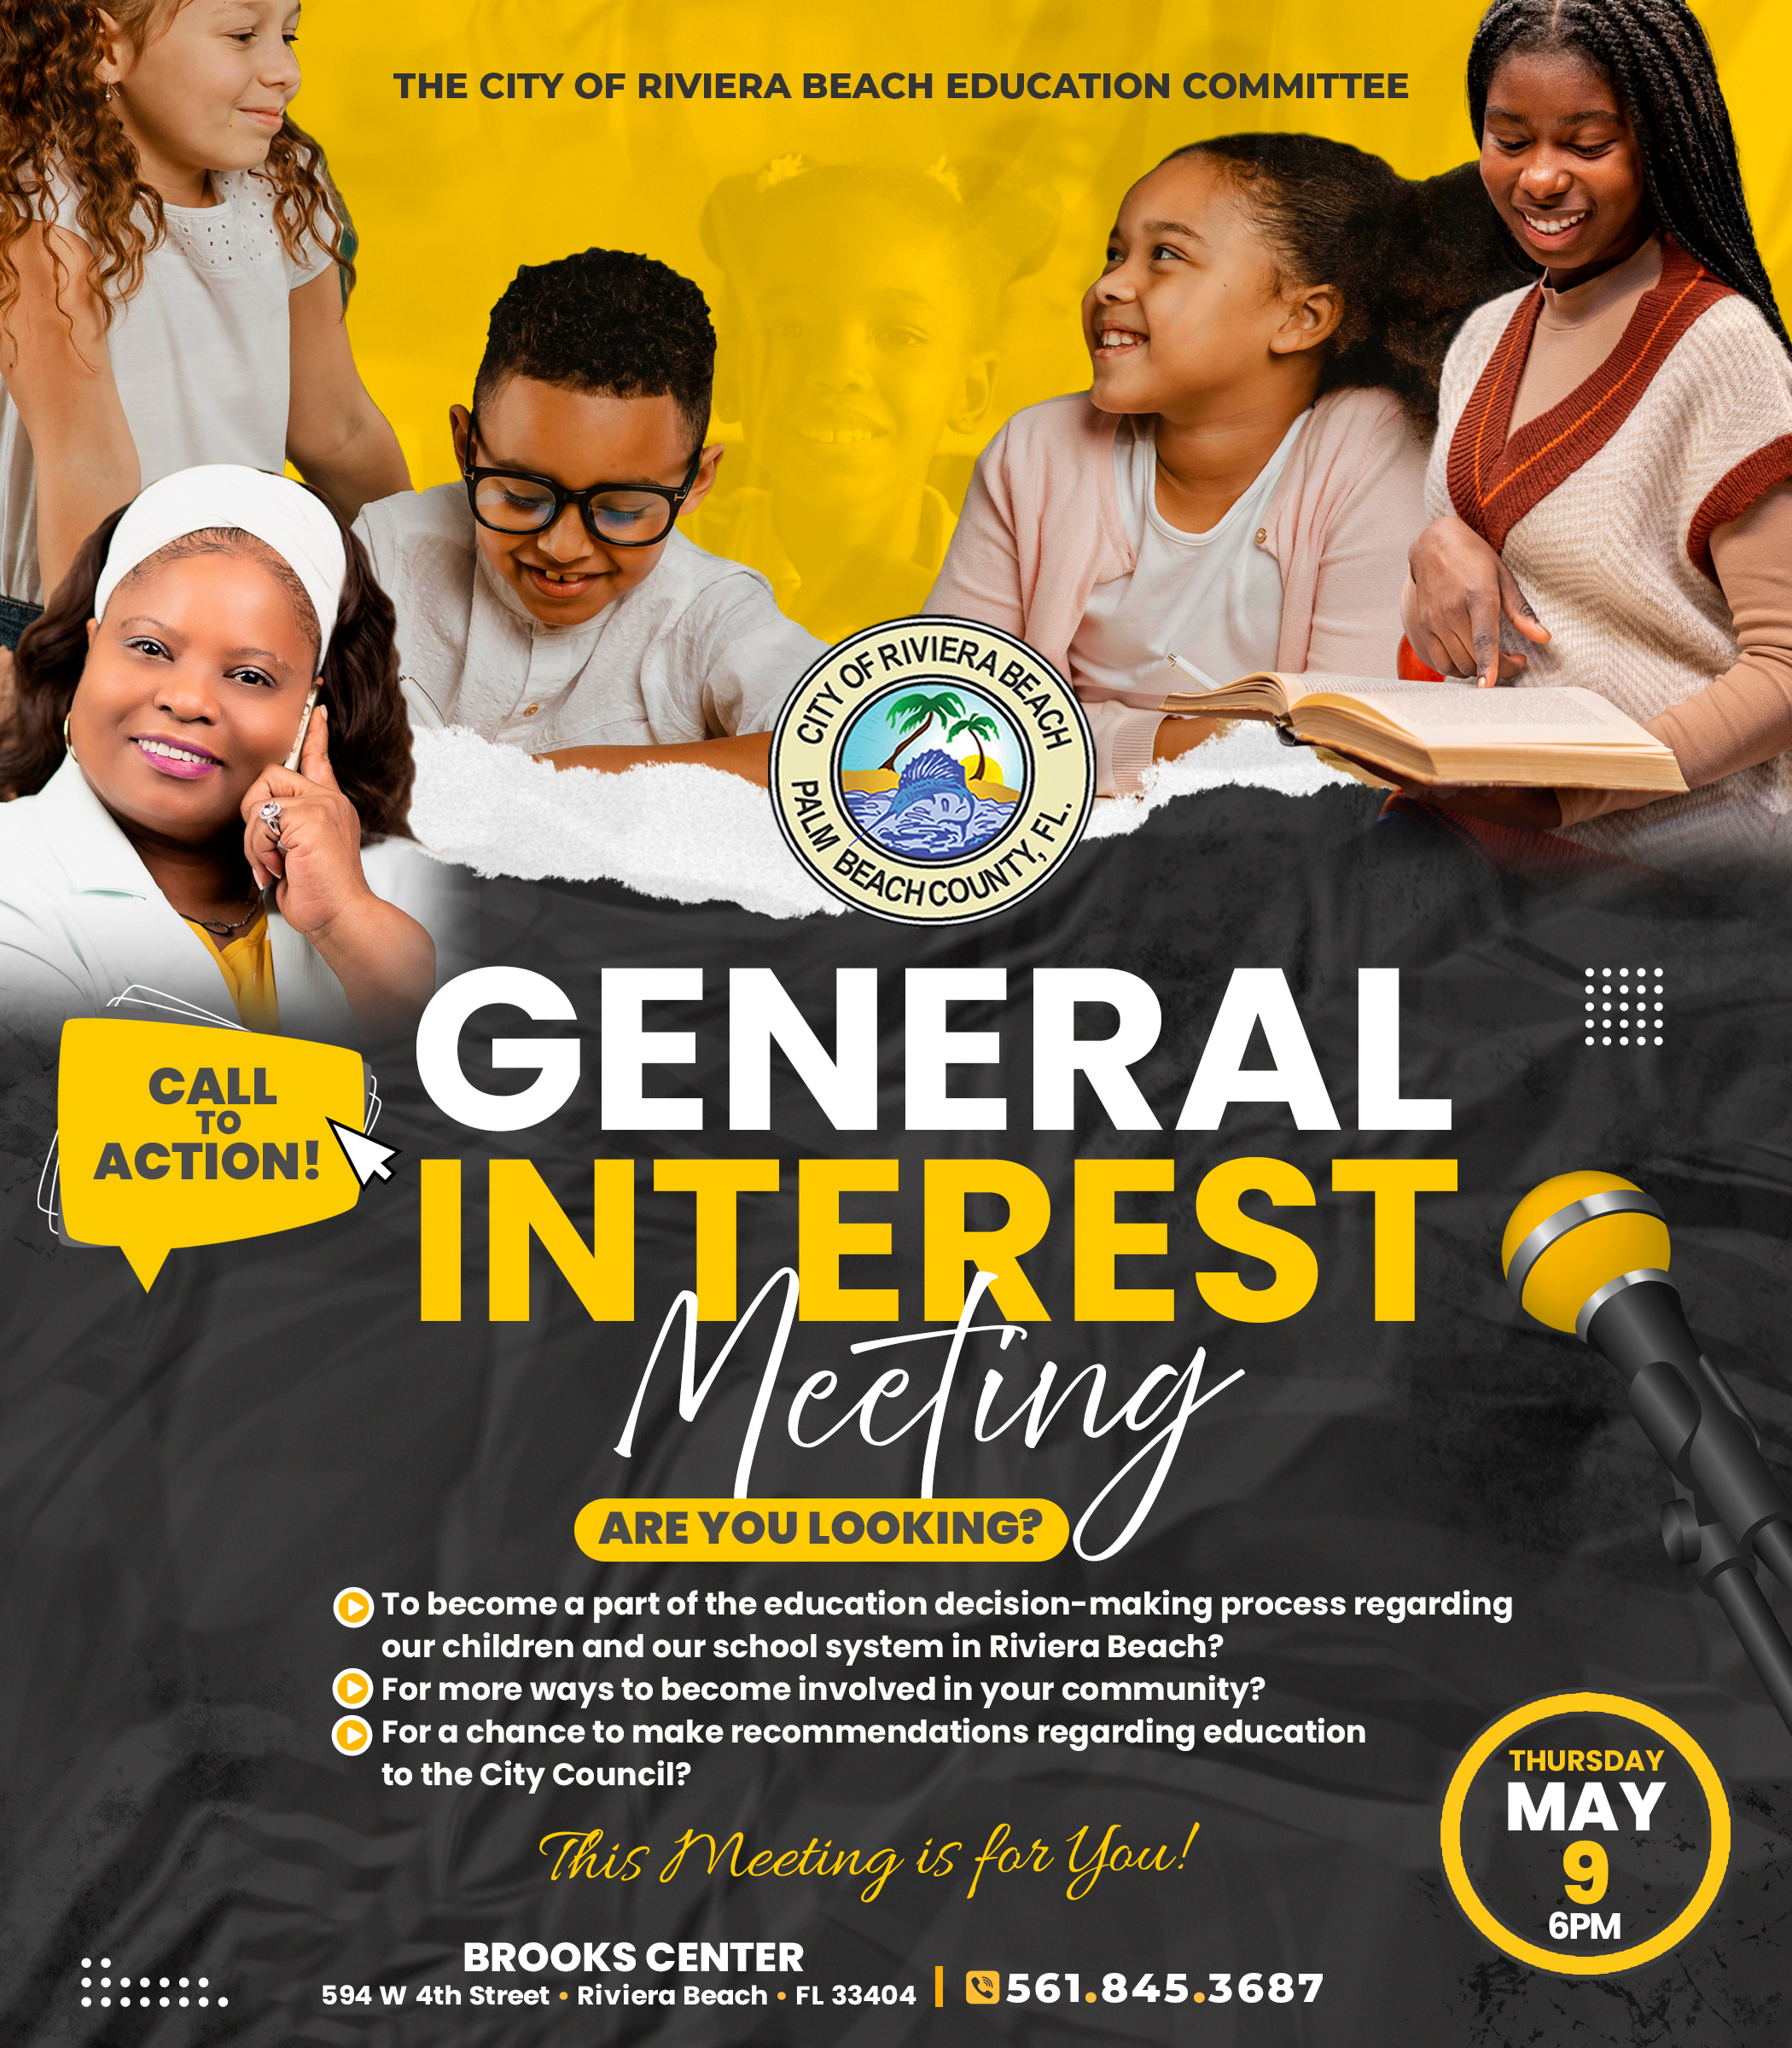 GENERAL INTEREST eeling To become a part of the education decision-making process regarding our children and our school system in Riviera Beach? For more ways to become involved in your community? ) For a chance to make recommendations regarding education to the City Council? This Mecting is far You!